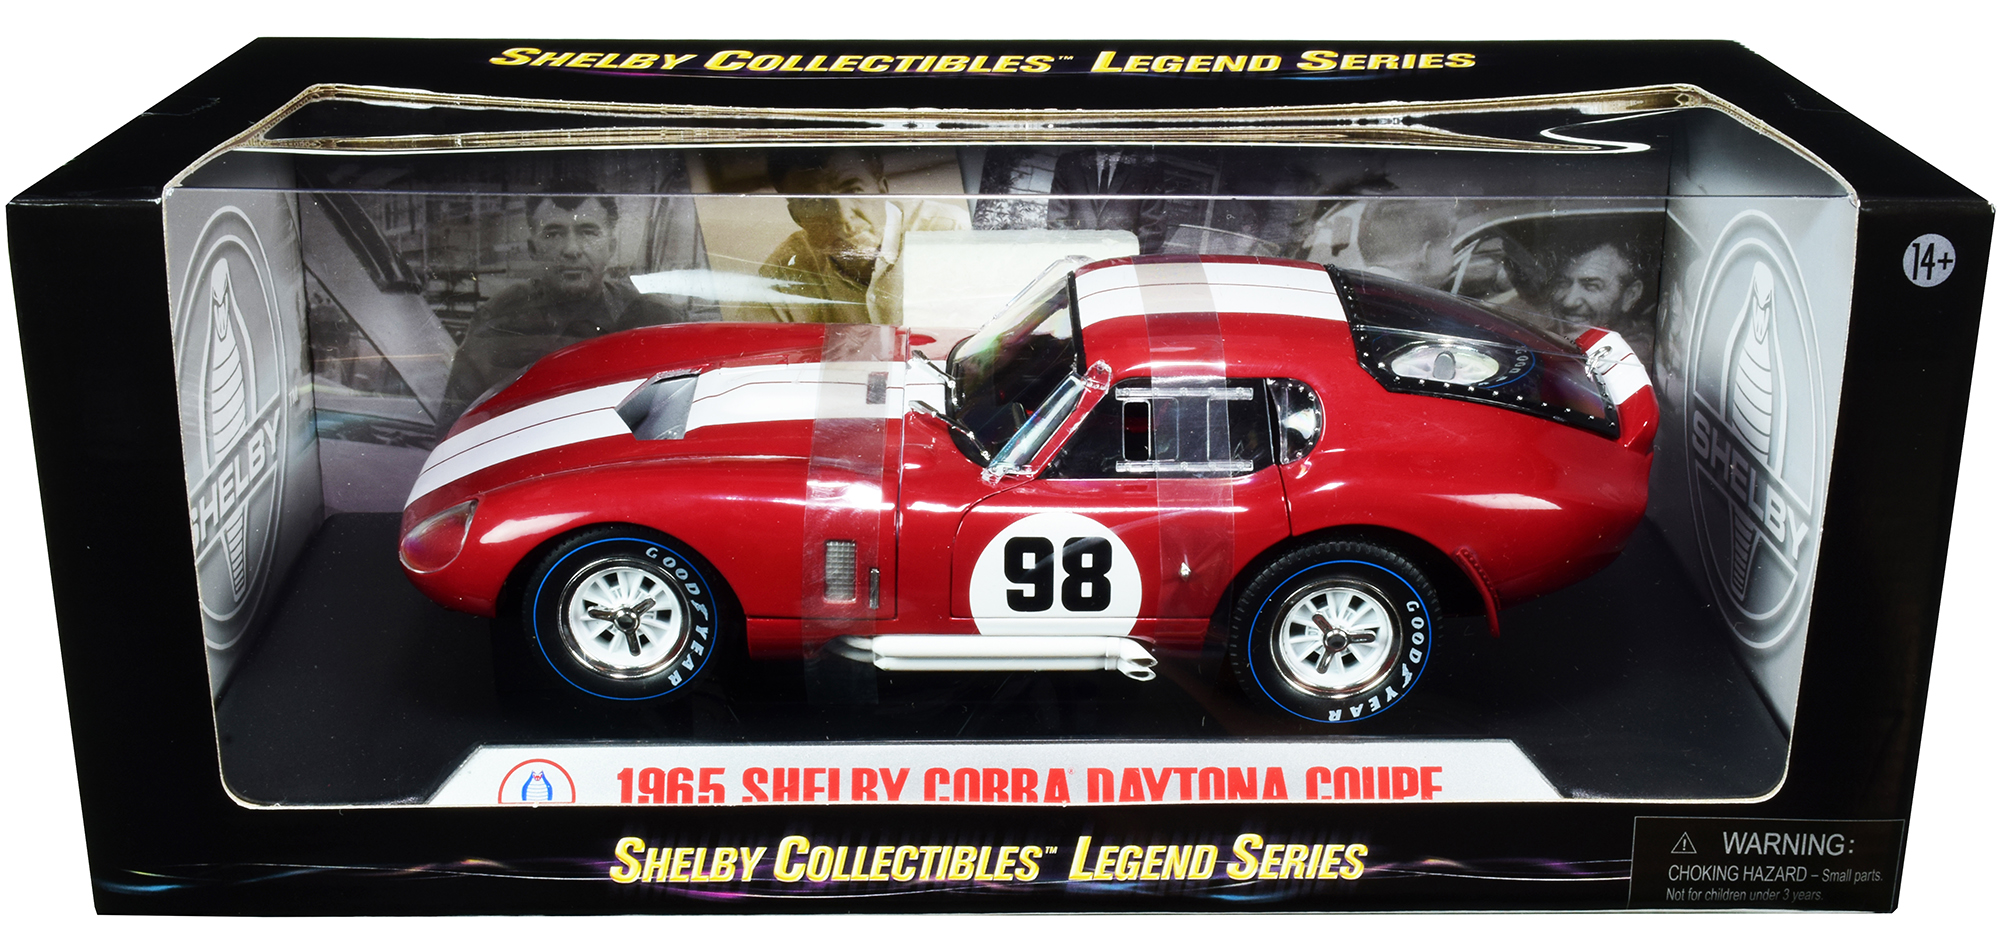 SHELBY COLLECTIBLES 1965 Shelby Cobra Daytona Coupe #98 Red with White Stripes 1/18 Diecast Model Car by Shelby Collectibles